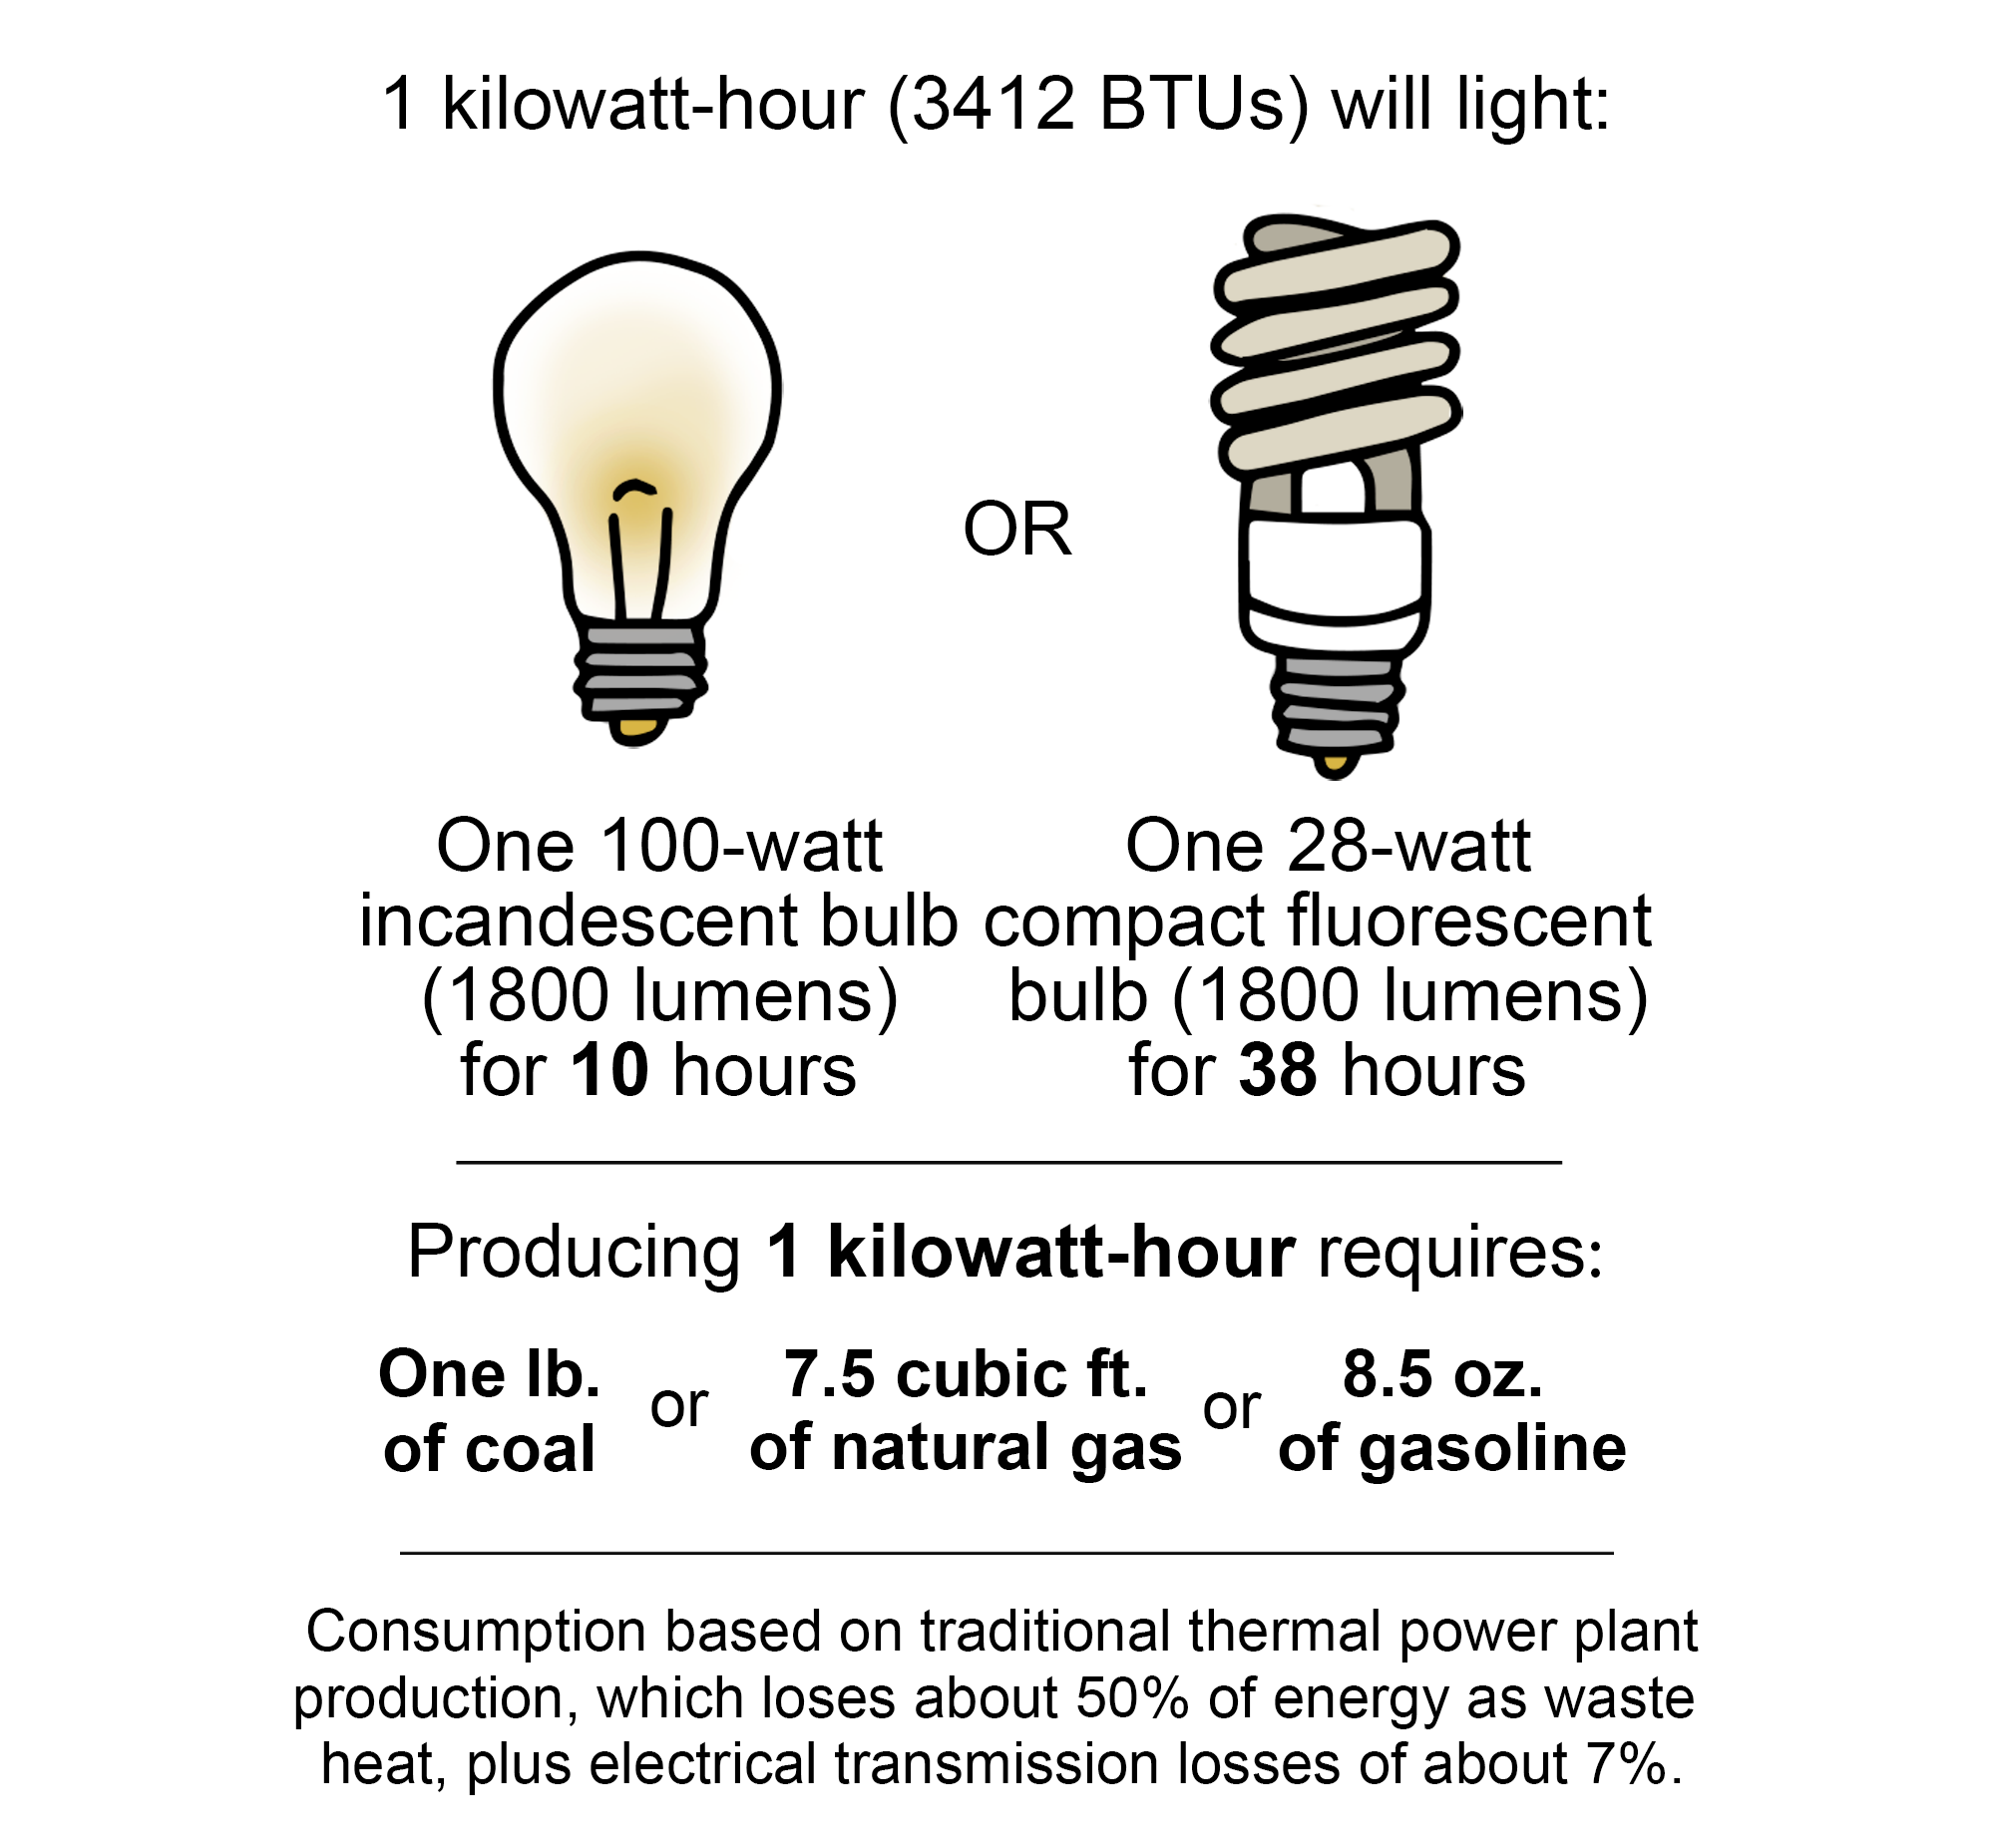 Diagram showing how much coal, natural gas, or gasoline is used to produce 1 kWh of energy and how long 1kWh can illuminate a light bulb.